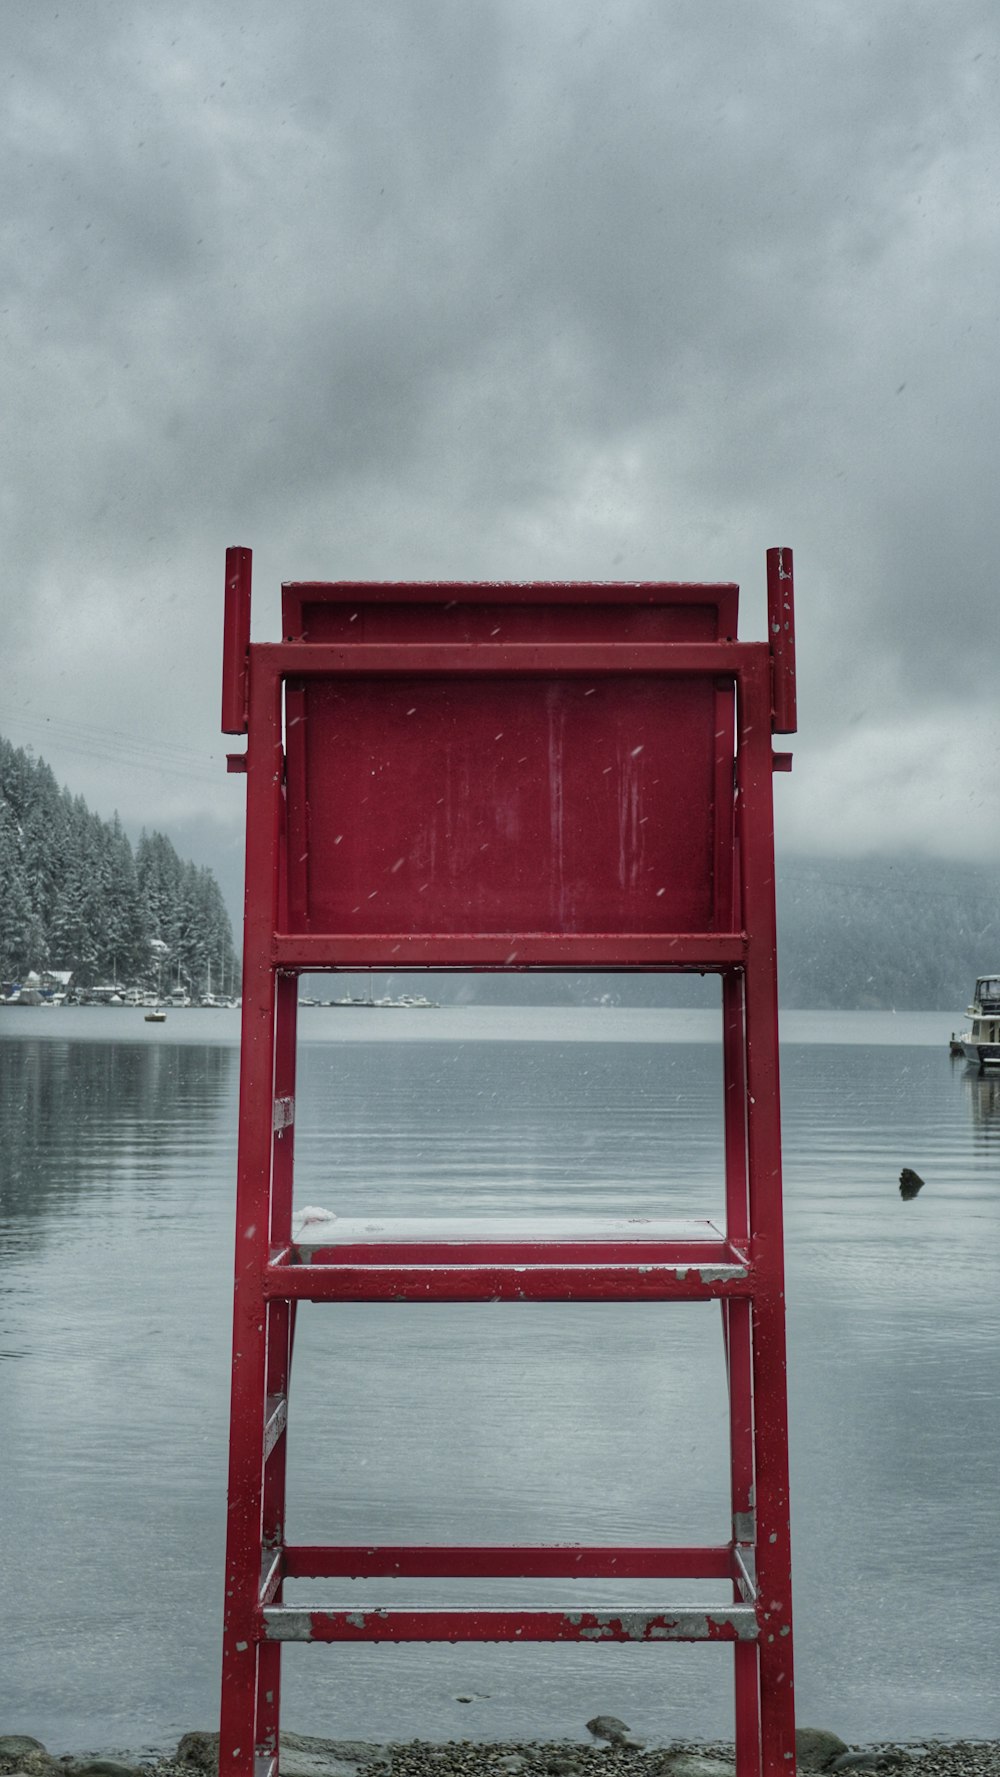 a red lifeguard chair sitting on the shore of a lake